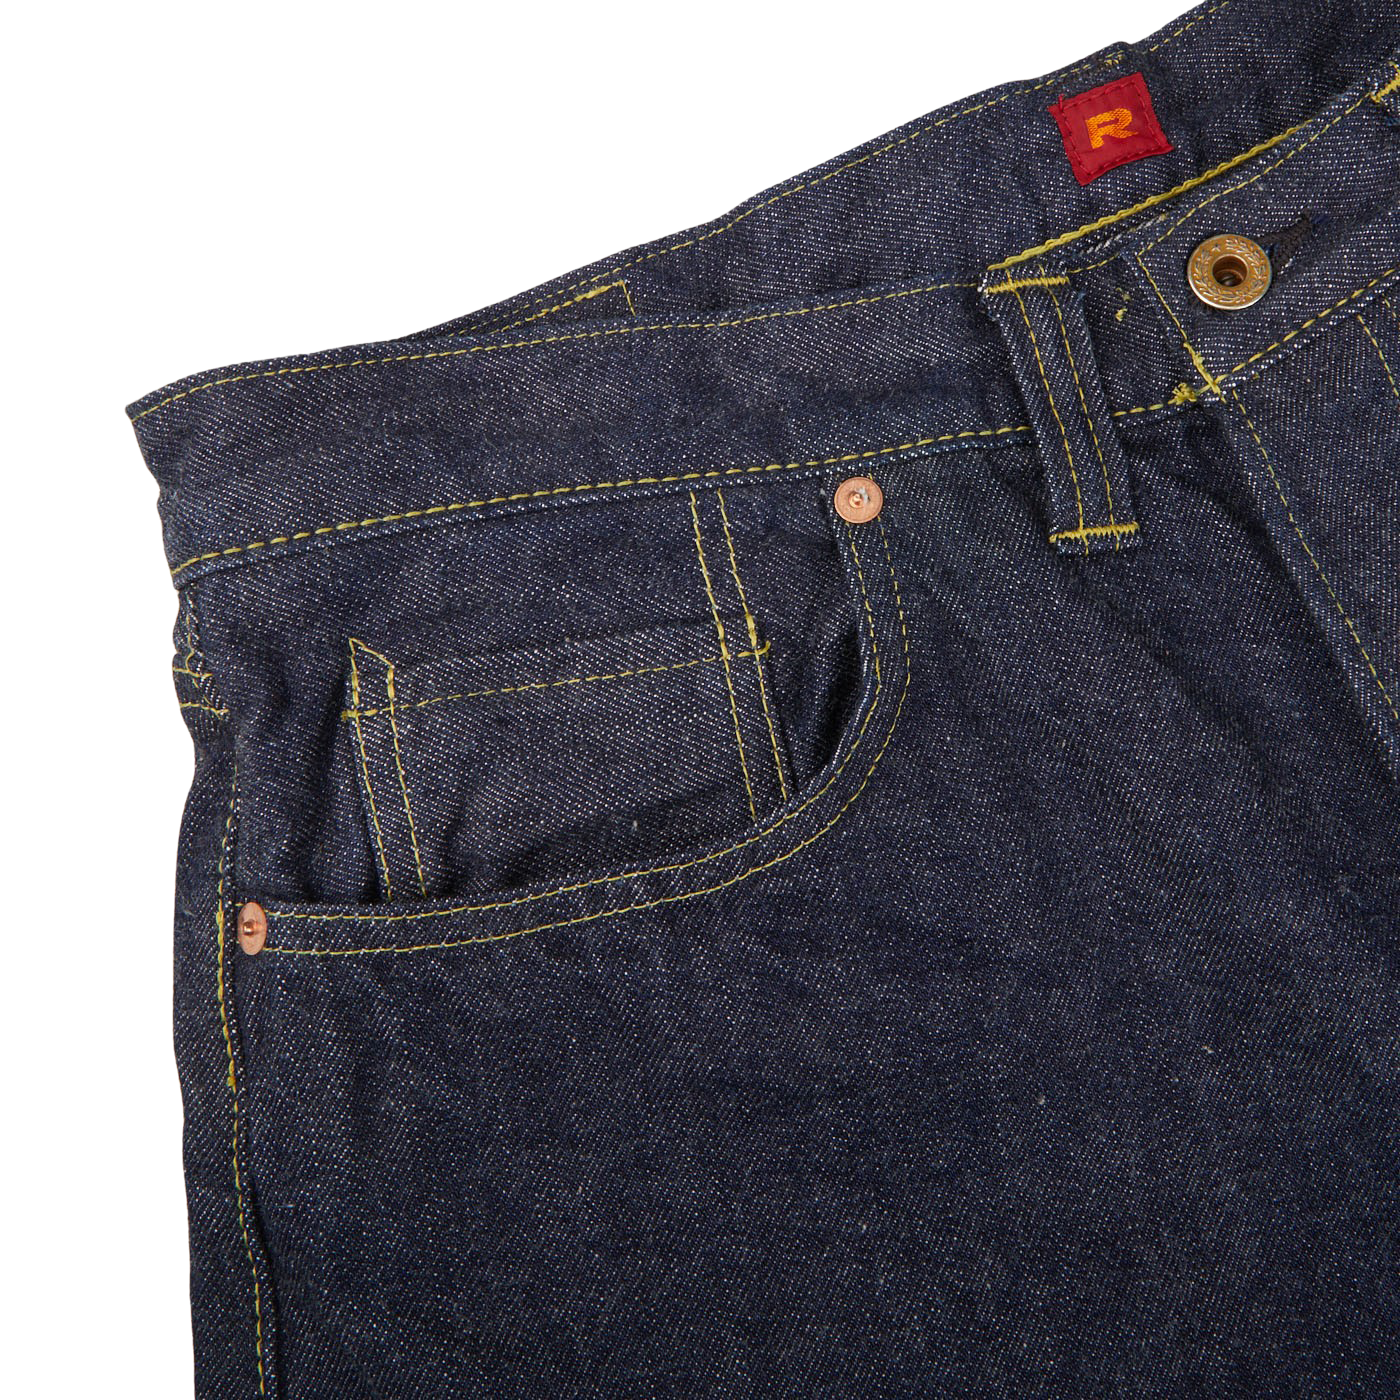 Close-up of dark blue cotton Resolute 714 One Wash jeans featuring detailed stitching and a front pocket with a visible red brand tag.